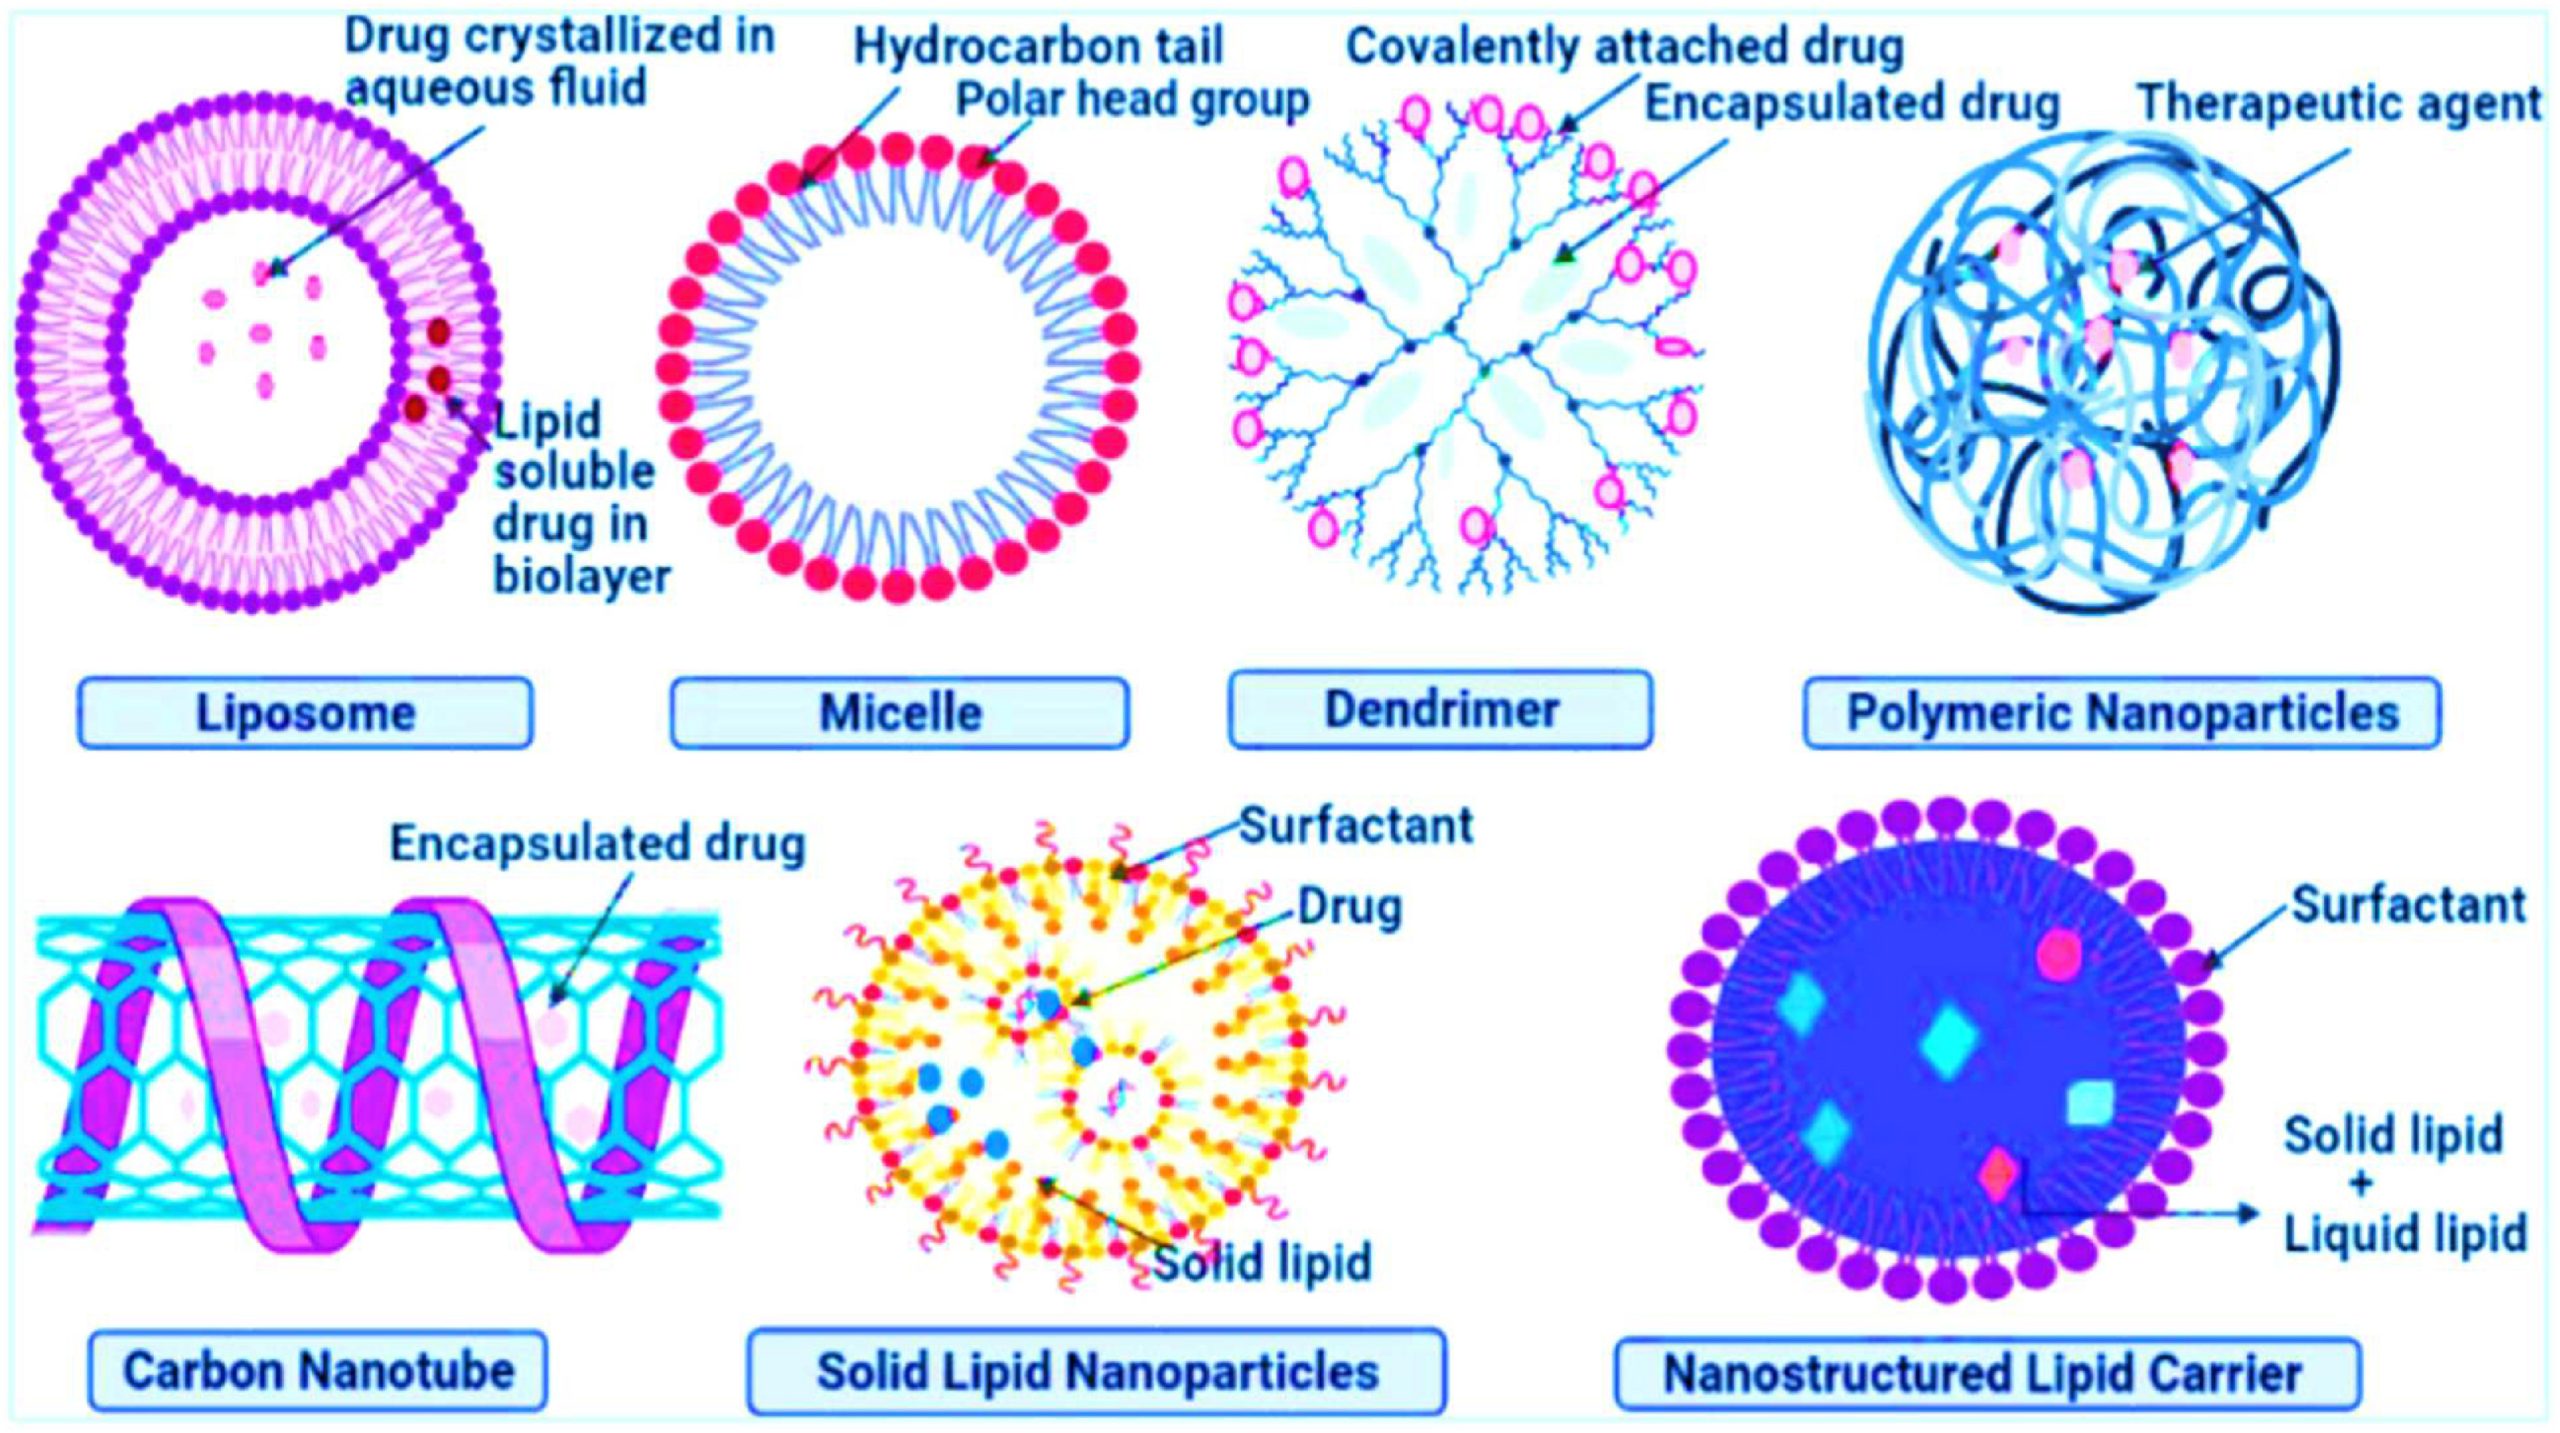 Review of the efficacy of nanoparticle-based drug delivery systems for cancer treatment